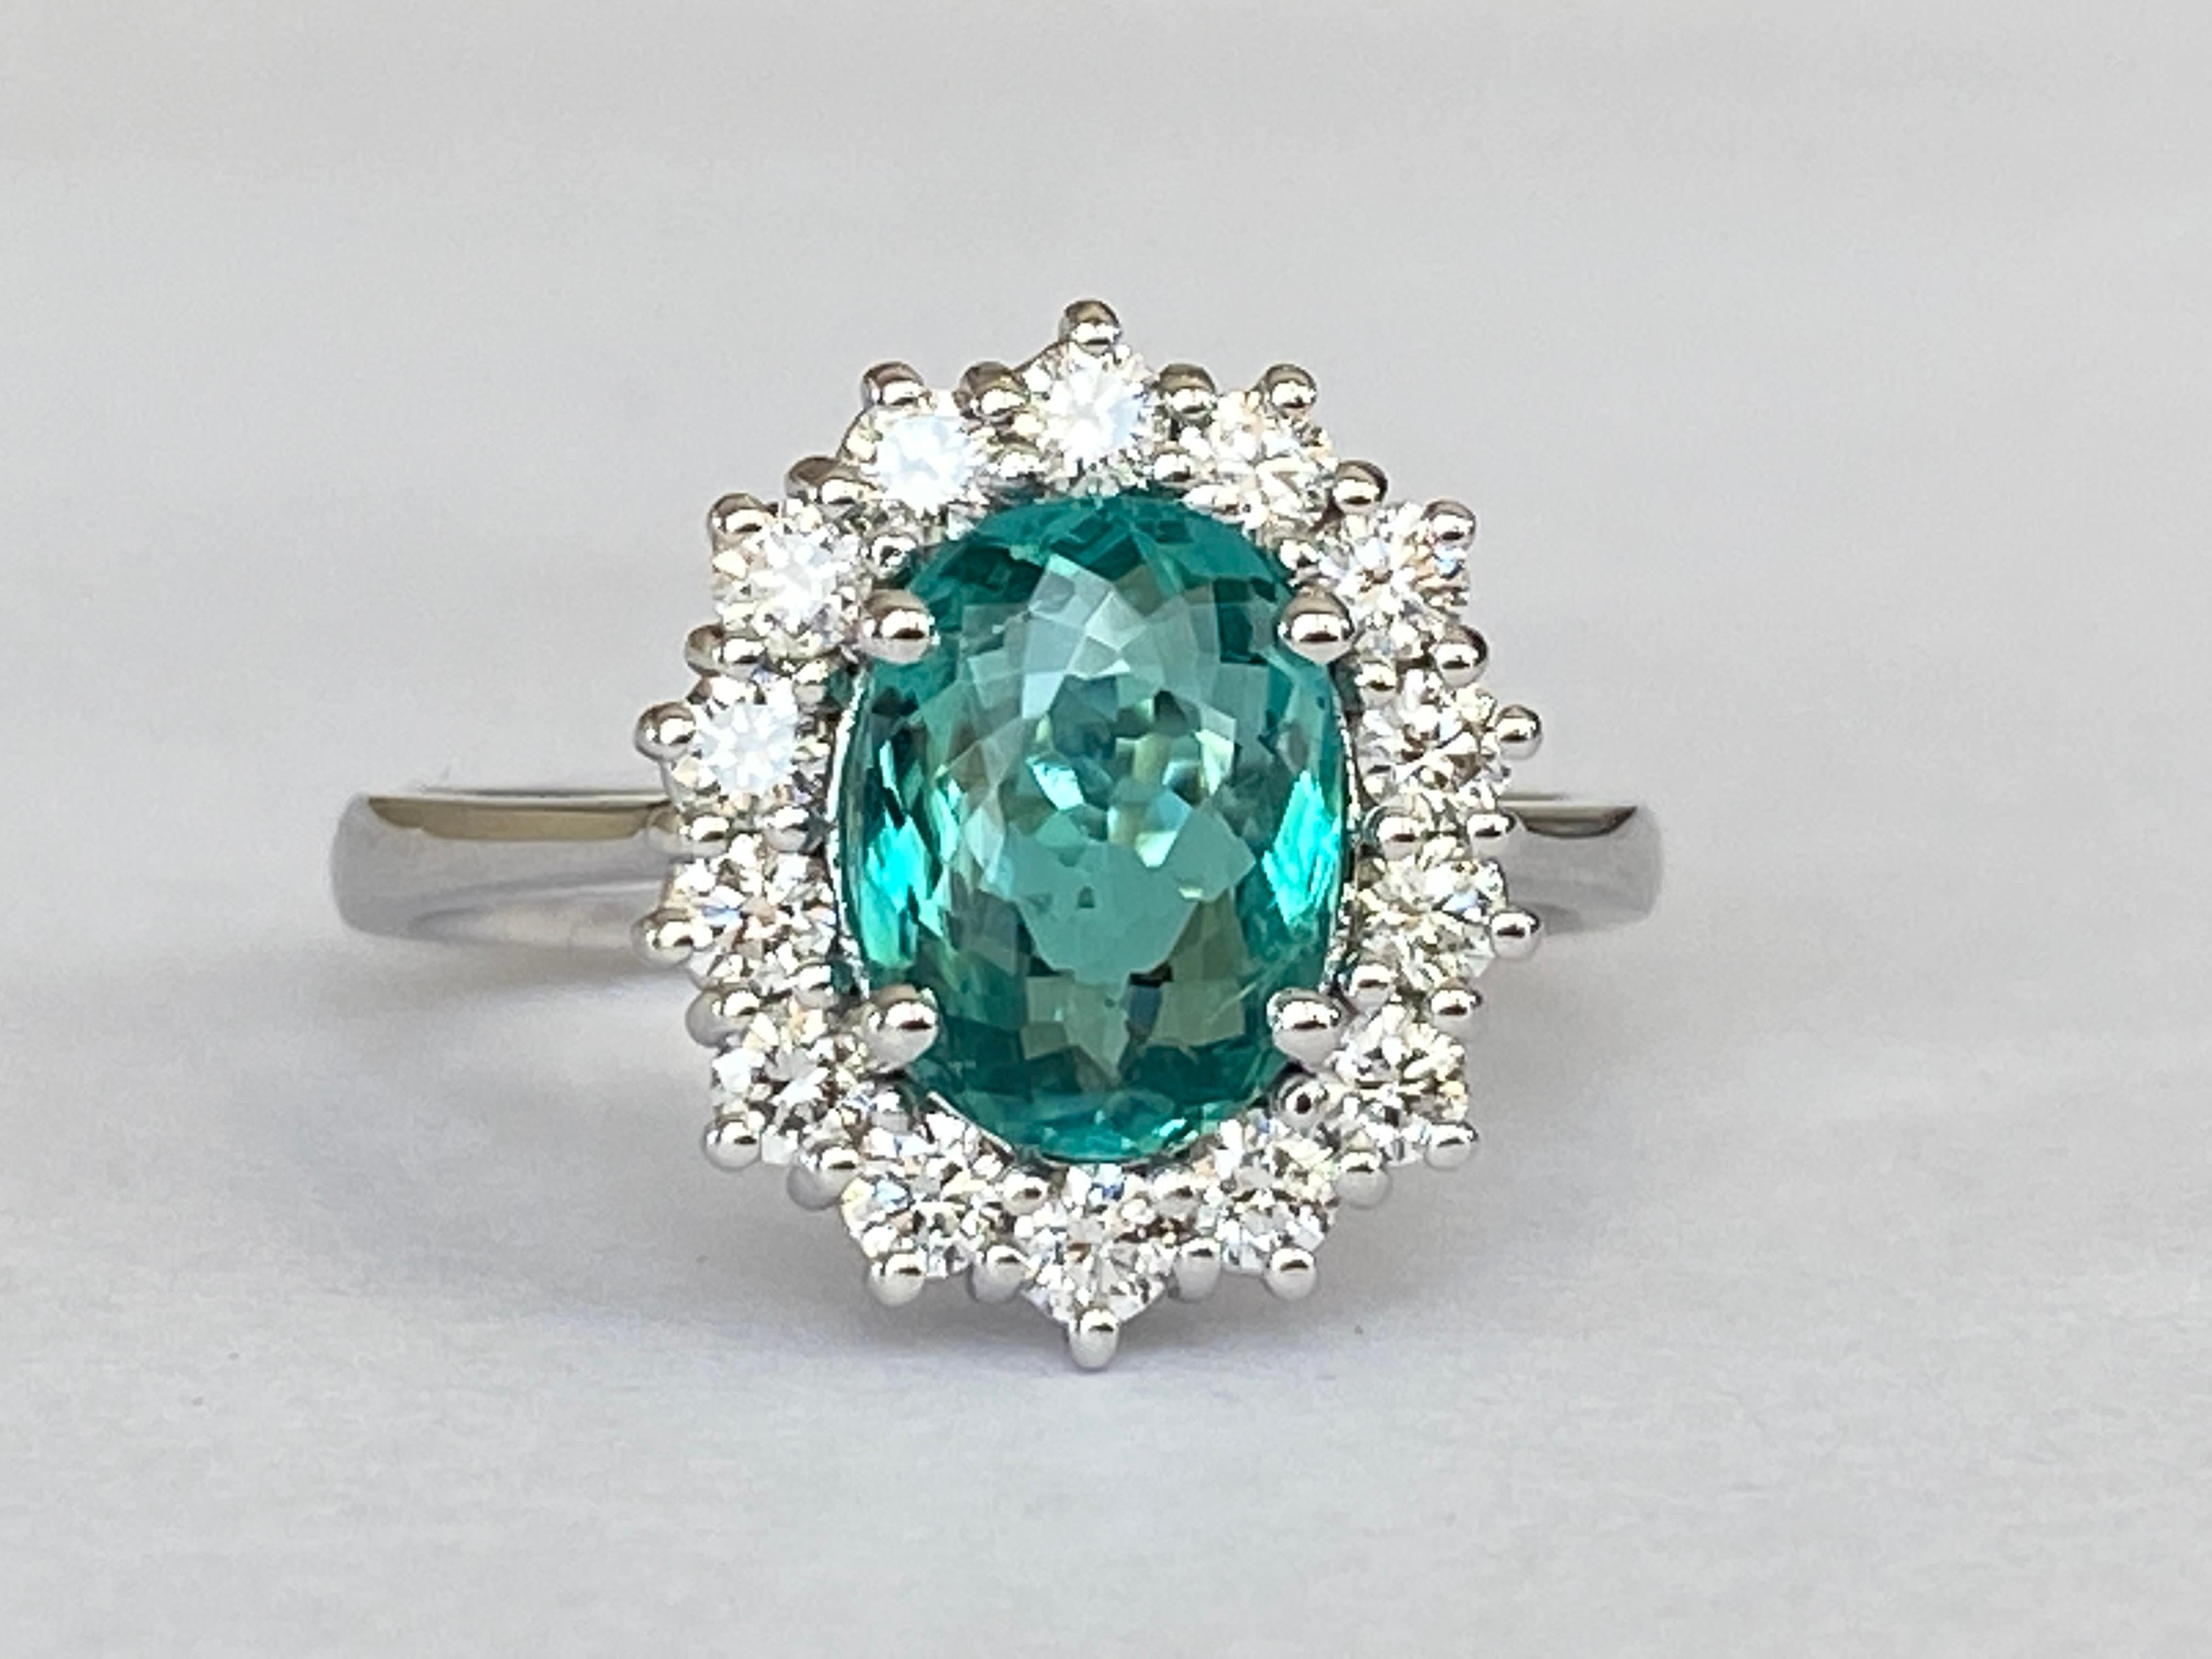 Exclusive handmade ring in 18 kt white gold set with oval mixed cut paraiba tourmaline of 1.59 carats and decorated with 14 pieces of brilliant cut diamonds. Total diamonds:0.48 ct F/G/VS/SI. ALGT certificate is included. Number 51387709. The